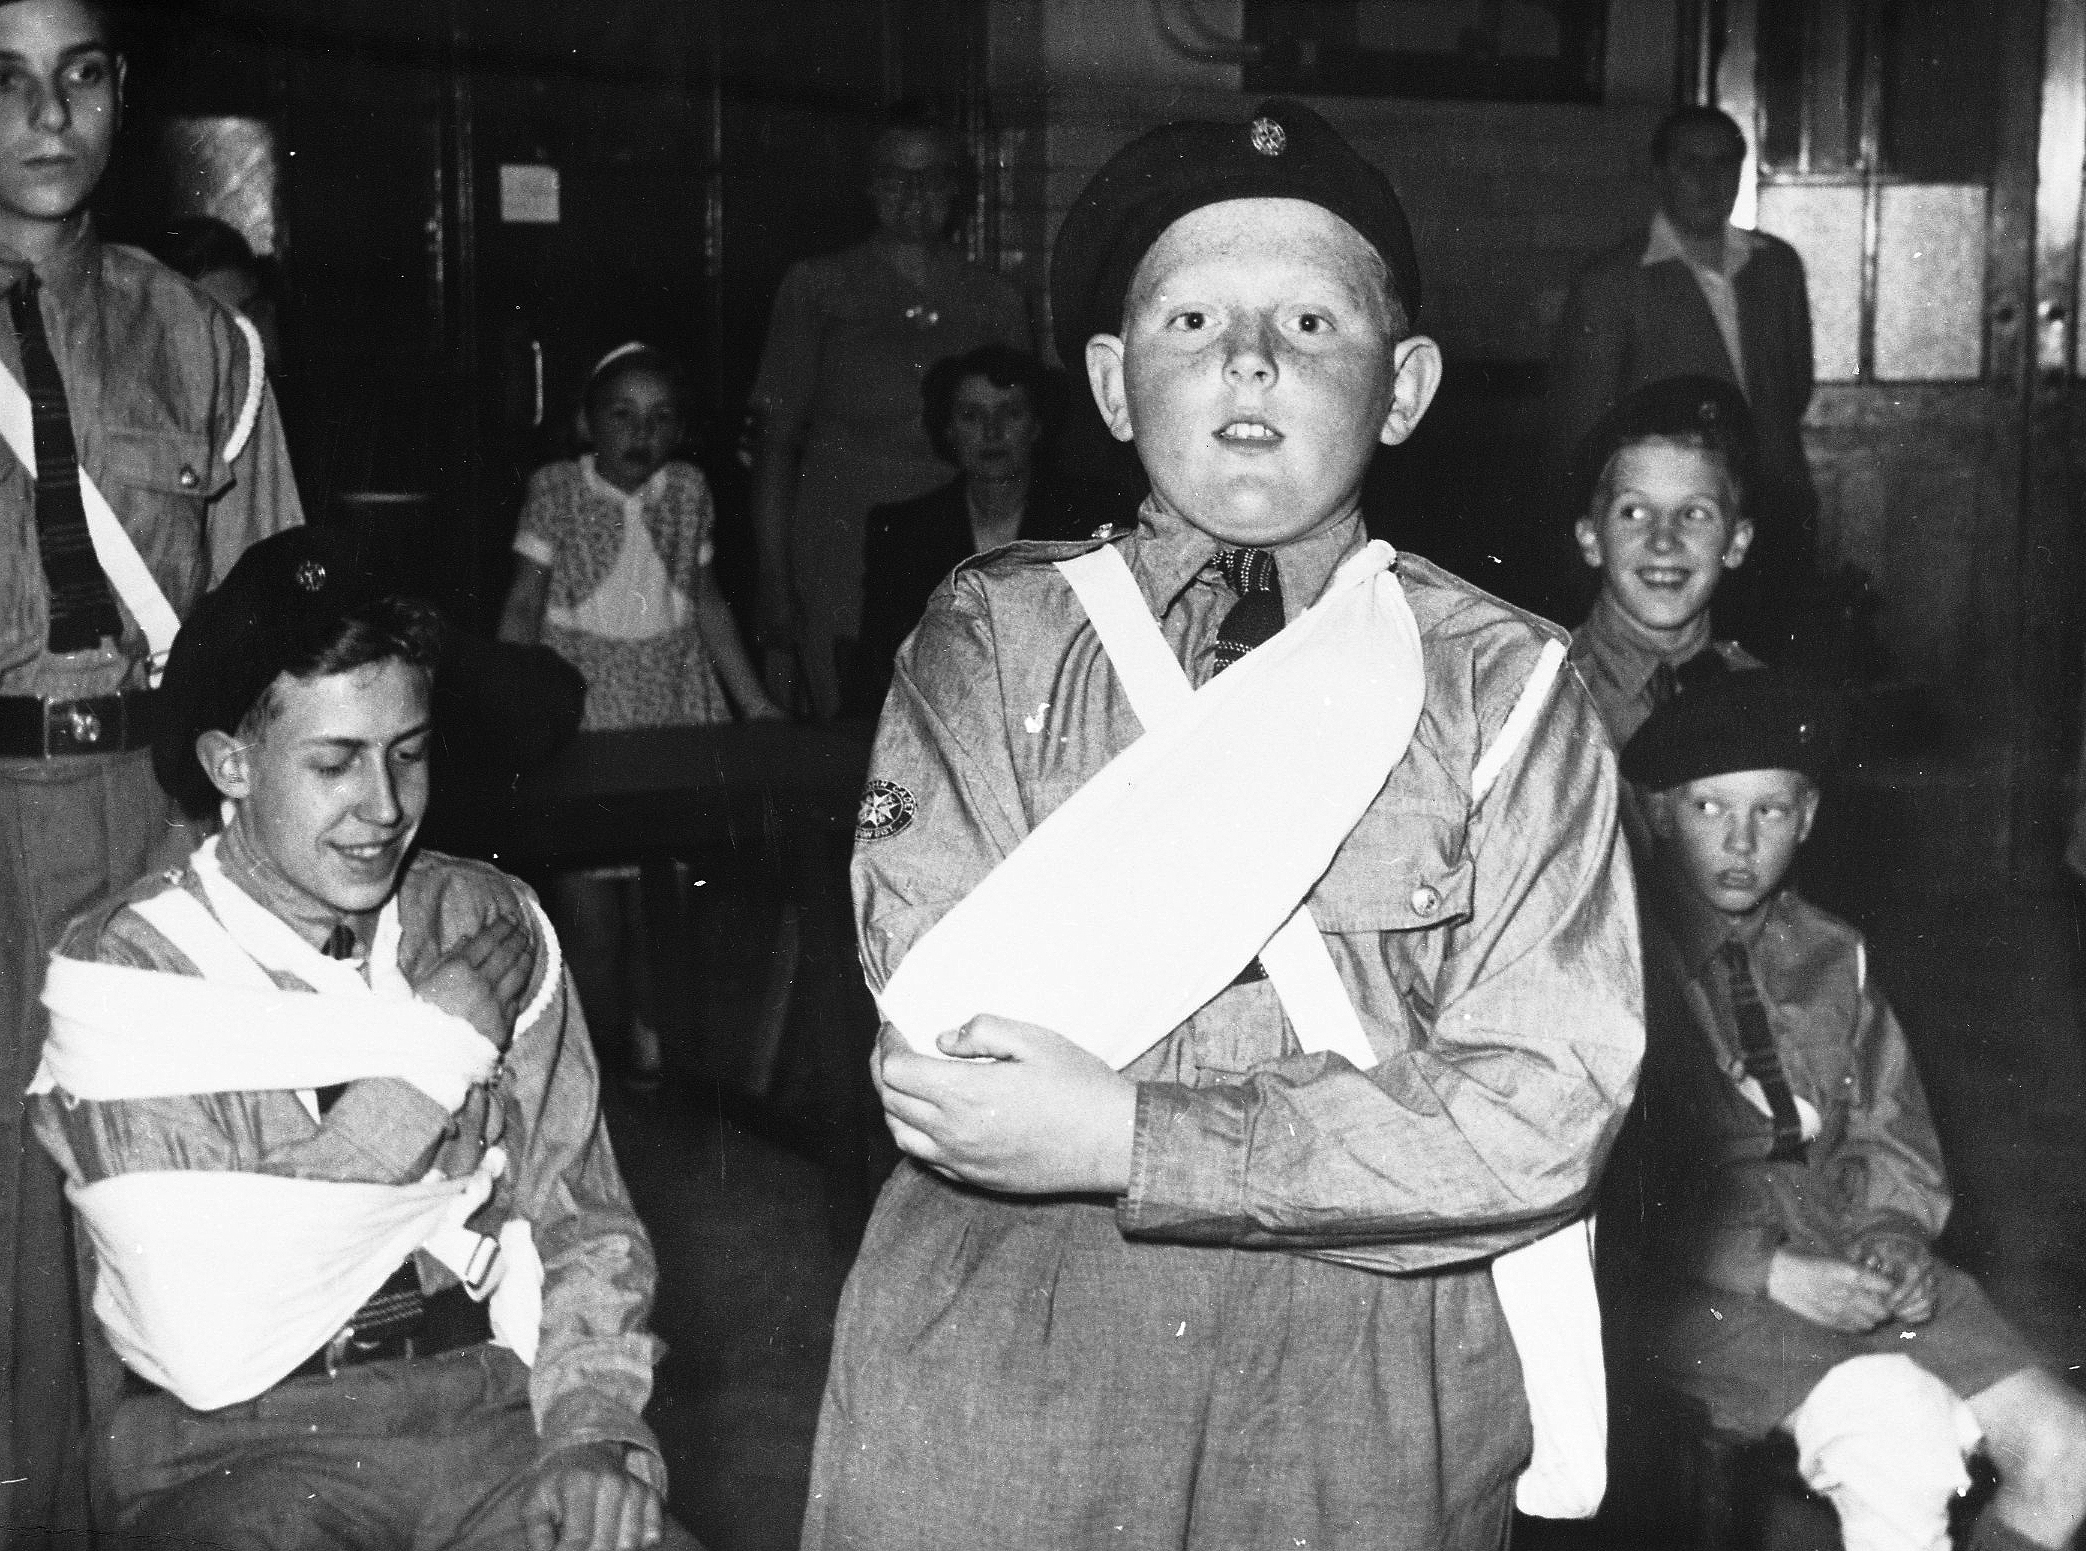 Black and white photograph of a young boy in uniform with his arm in a sling. Beside him to the left is a girl